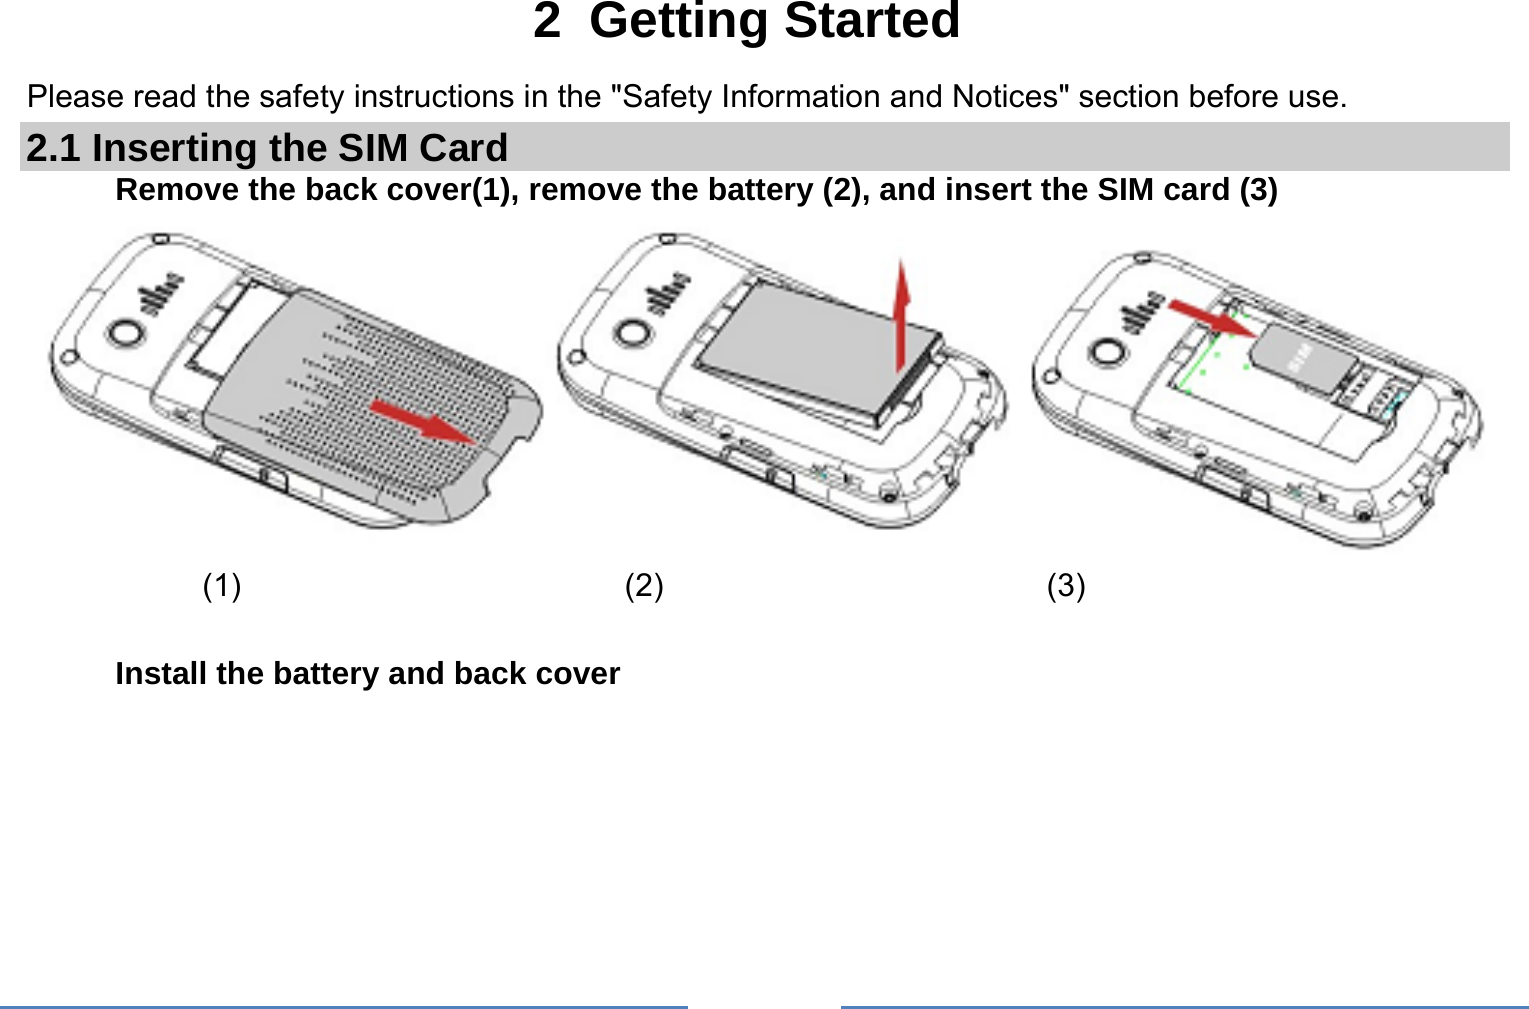     2 Getting Started Please read the safety instructions in the &quot;Safety Information and Notices&quot; section before use. 2.1 Inserting the SIM Card Remove the back cover(1), remove the battery (2), and insert the SIM card (3)             (1)                        (2)                        (3)  Install the battery and back cover 